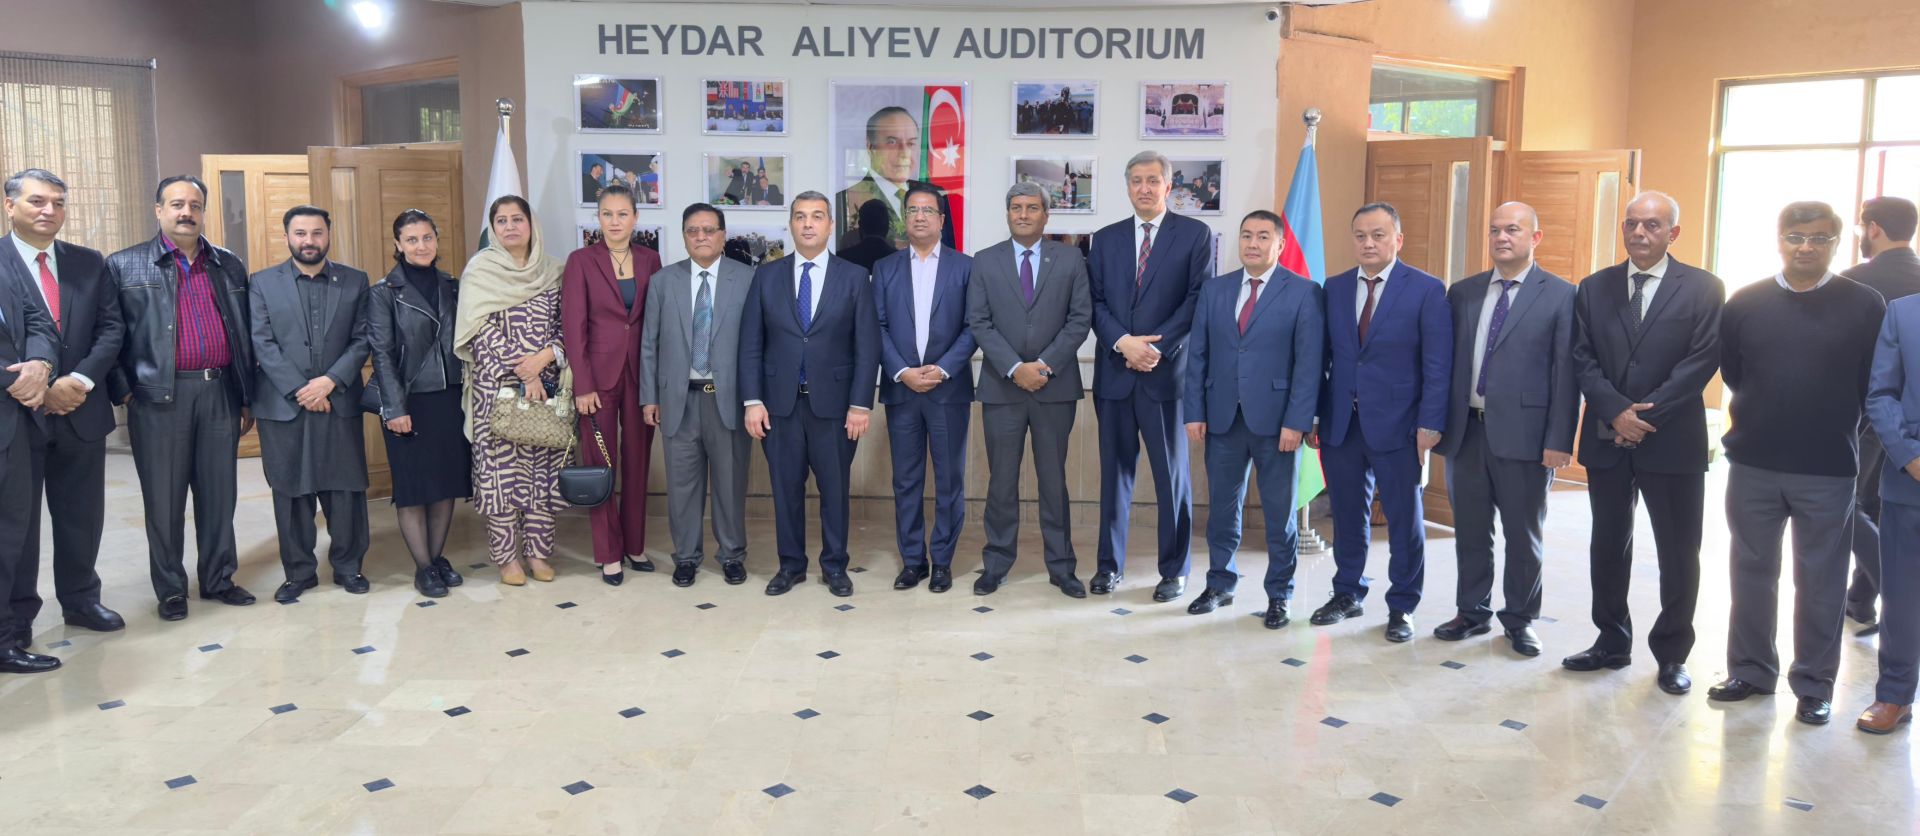 Auditorium named after National Leader Heydar Aliyev launched in Pakistan [PHOTOS]